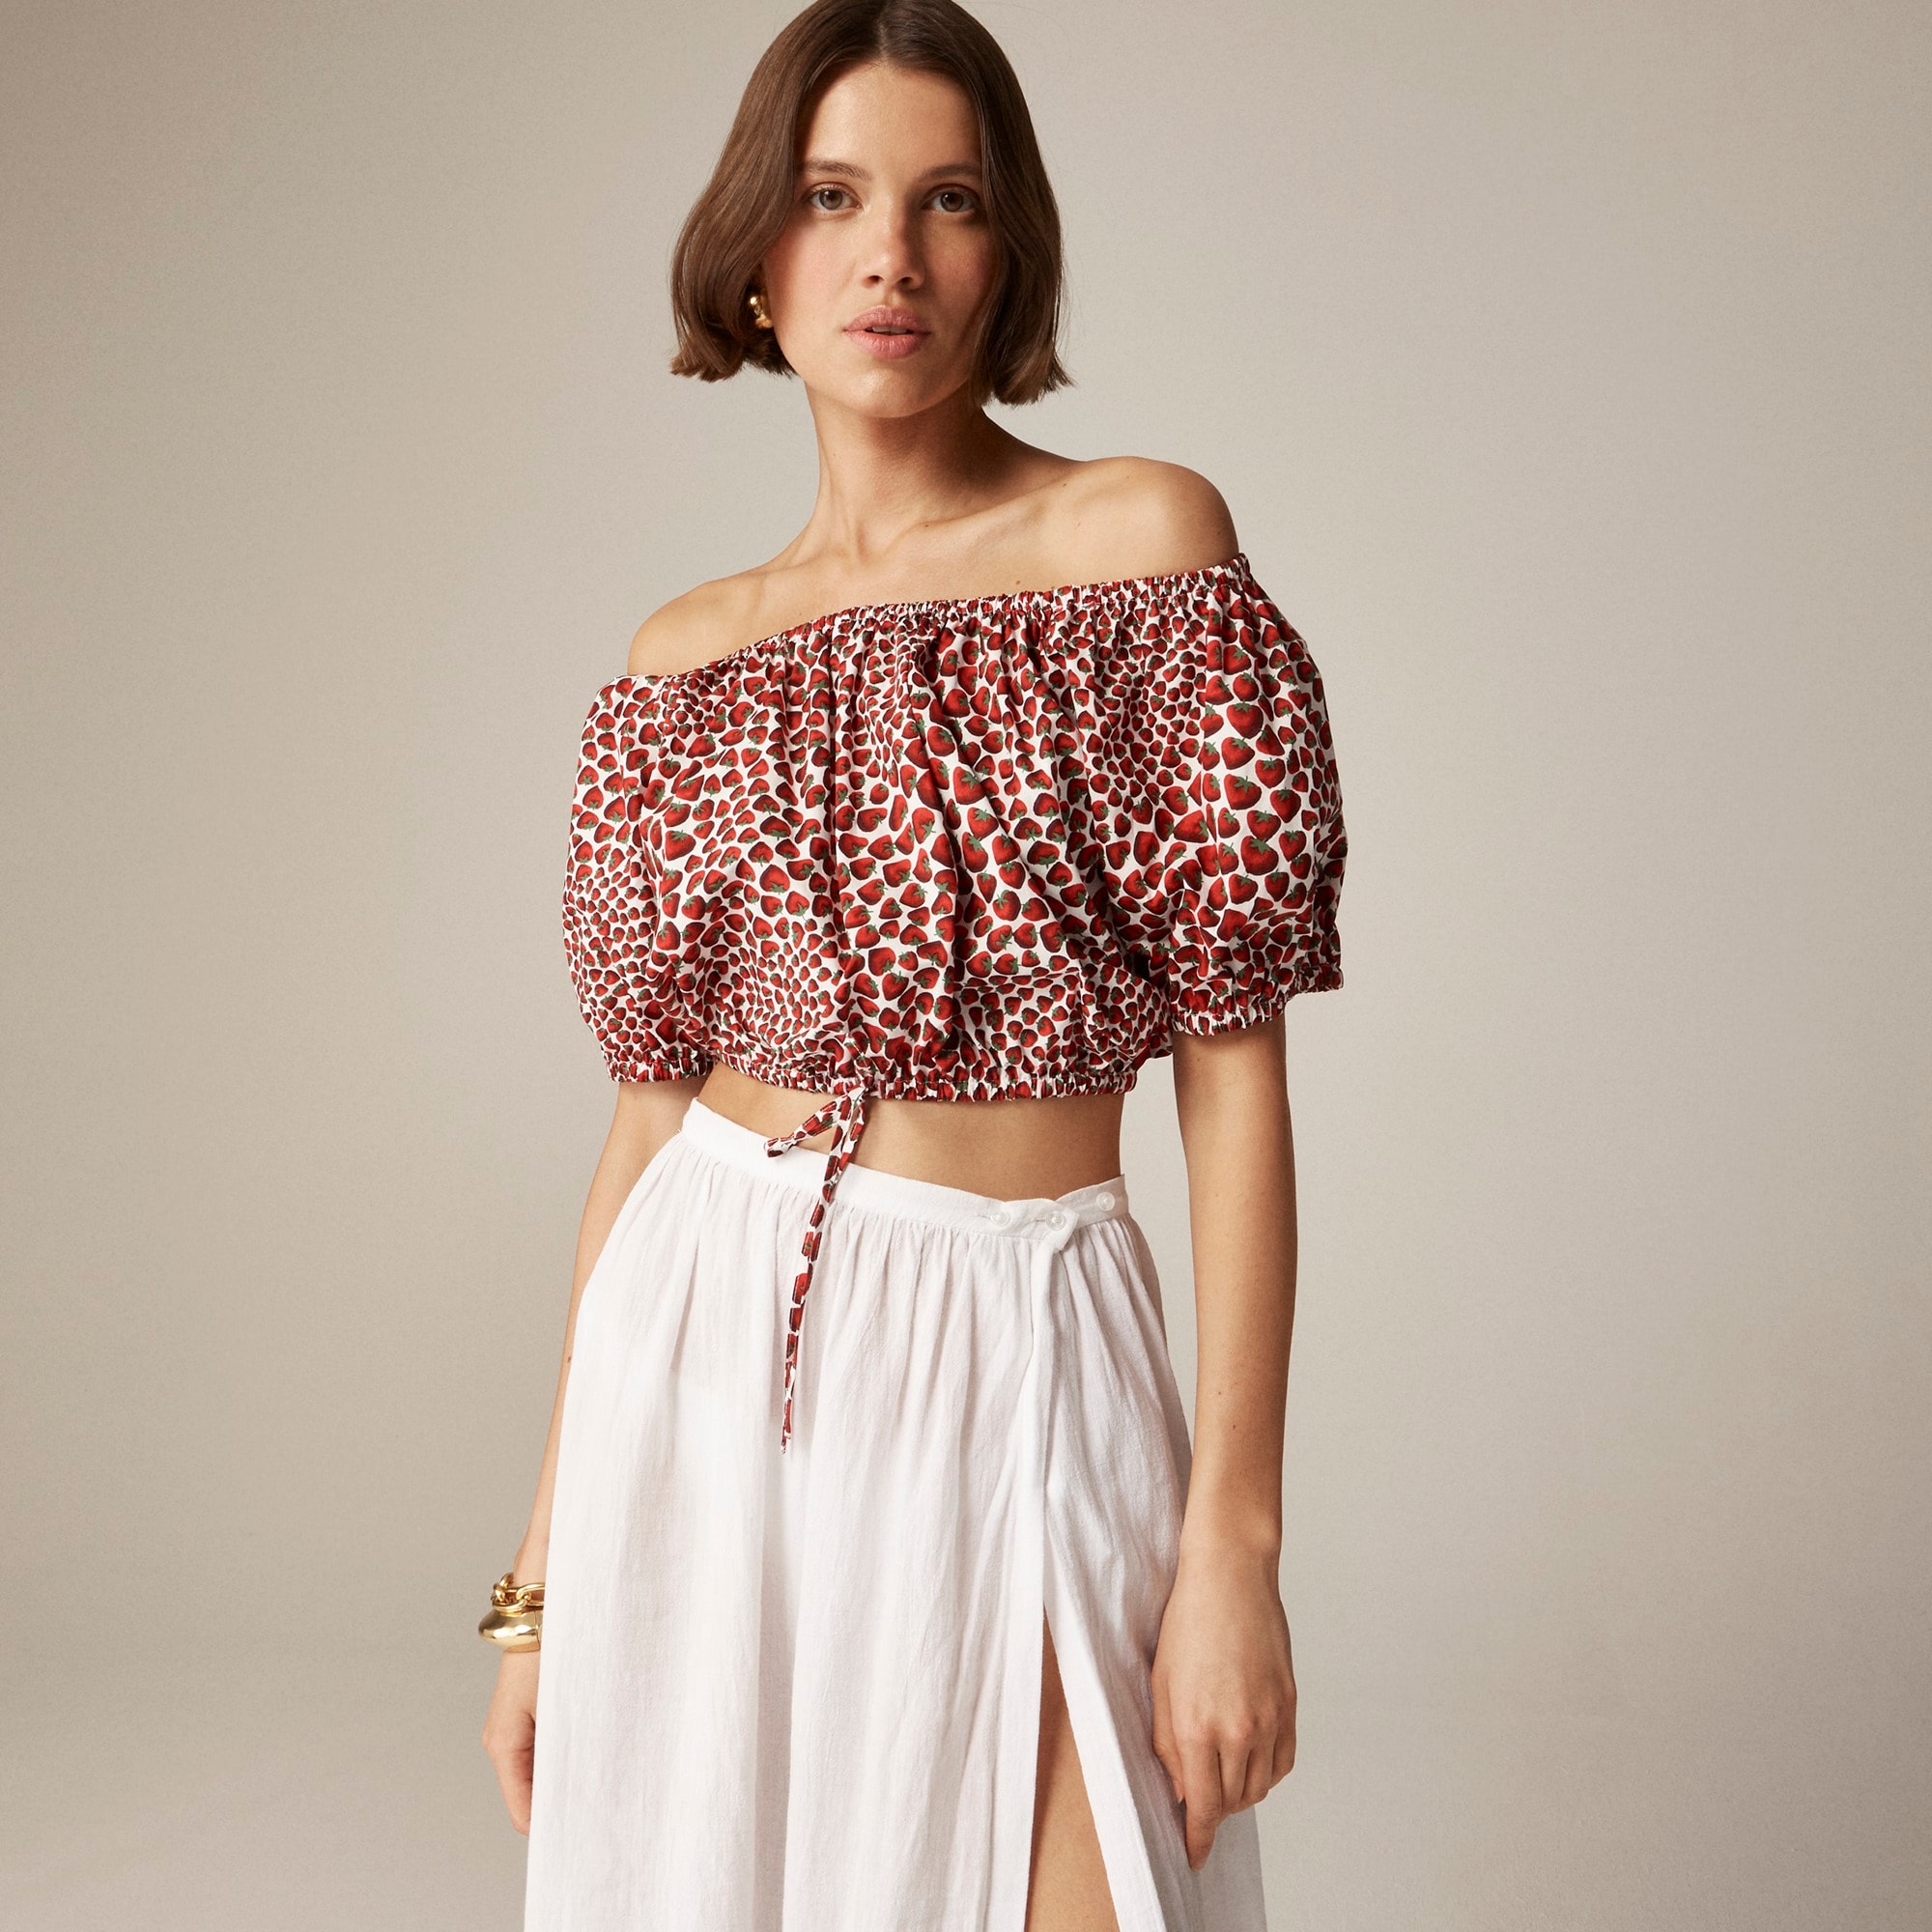  Cinched-waist cropped top in strawberry swirl cotton poplin